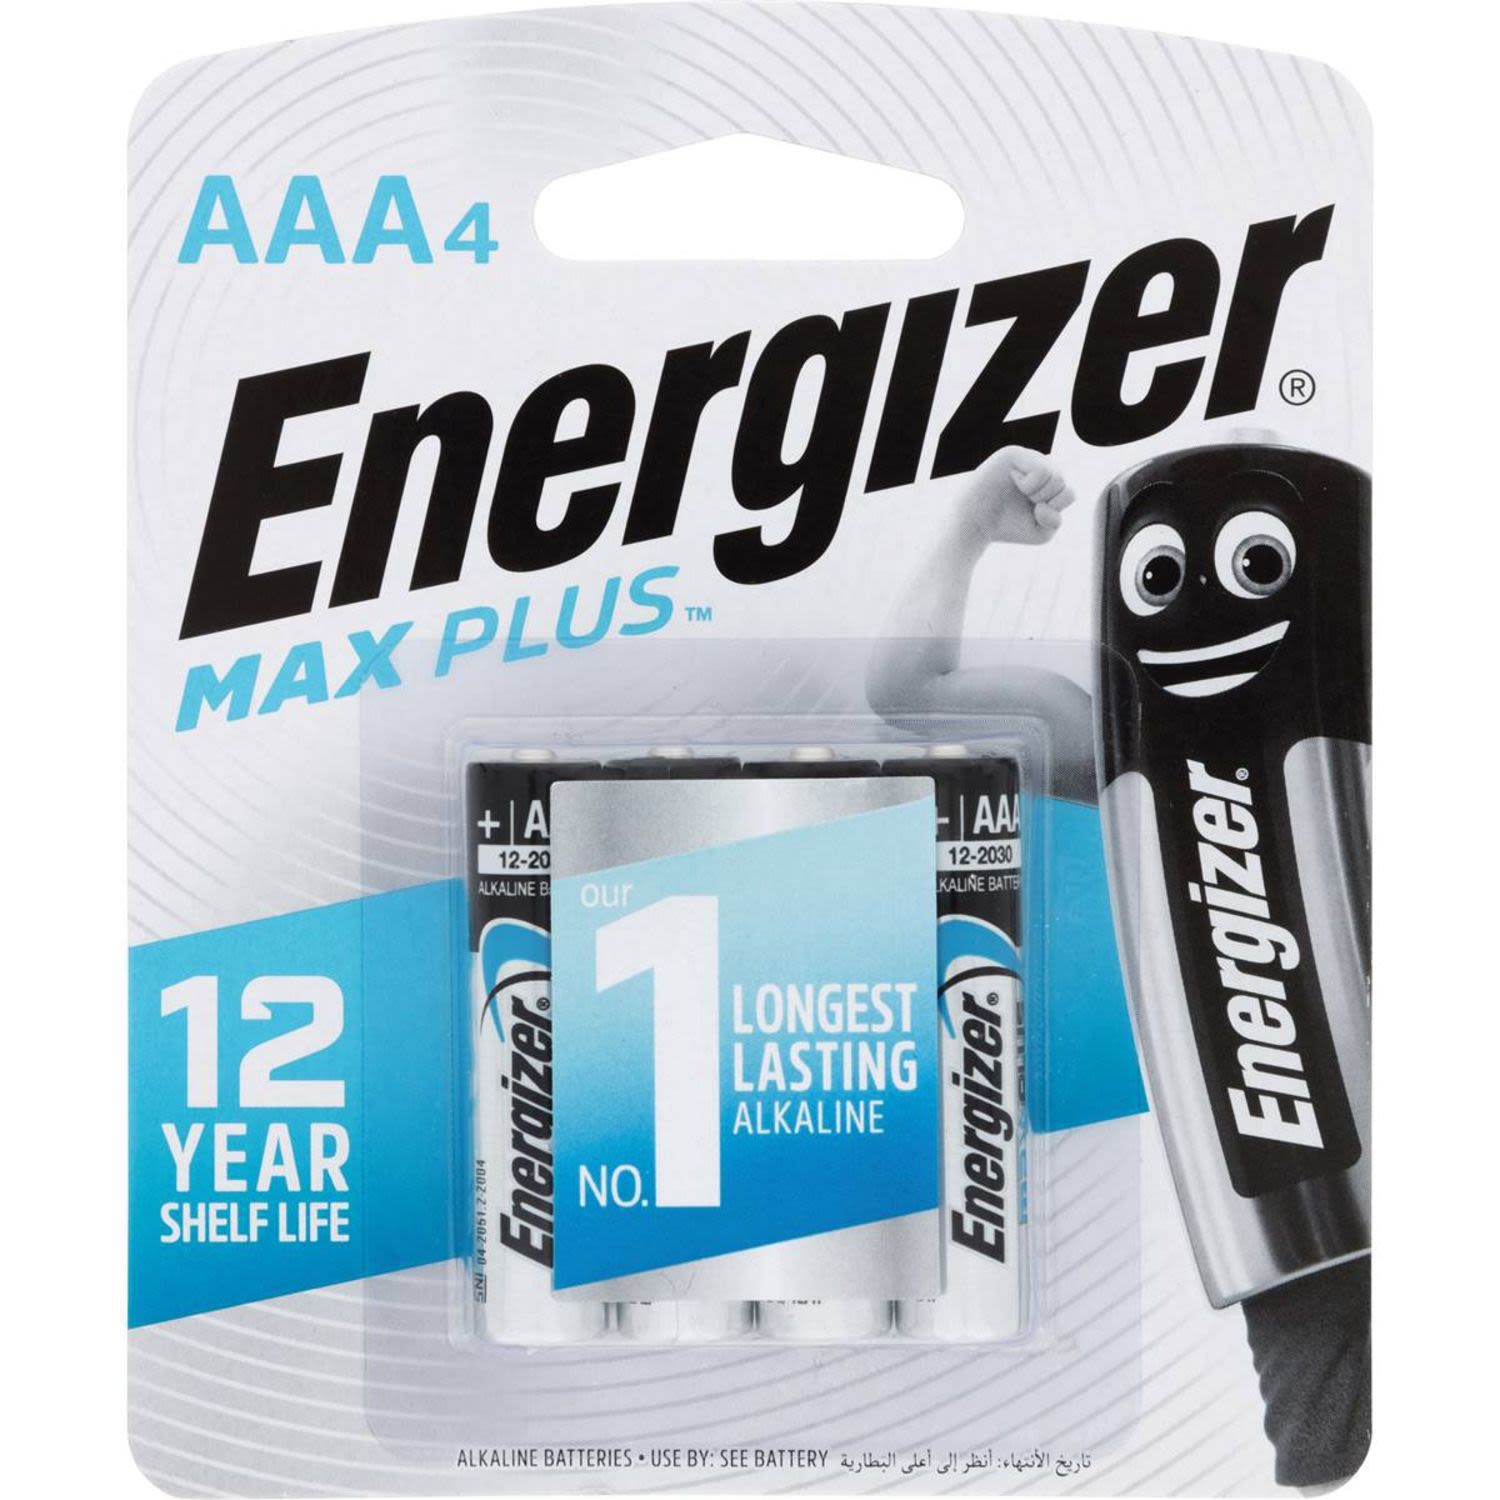 Energizer MAX PLUS batteries hold power for up to 12 years while in storage, so you have power when you need it most. Your most demanding devices, like cameras, personal groomers, and handheld games and controllers, stay powered up with the long-lasting energy you expect from Energizer.<br /> <br />